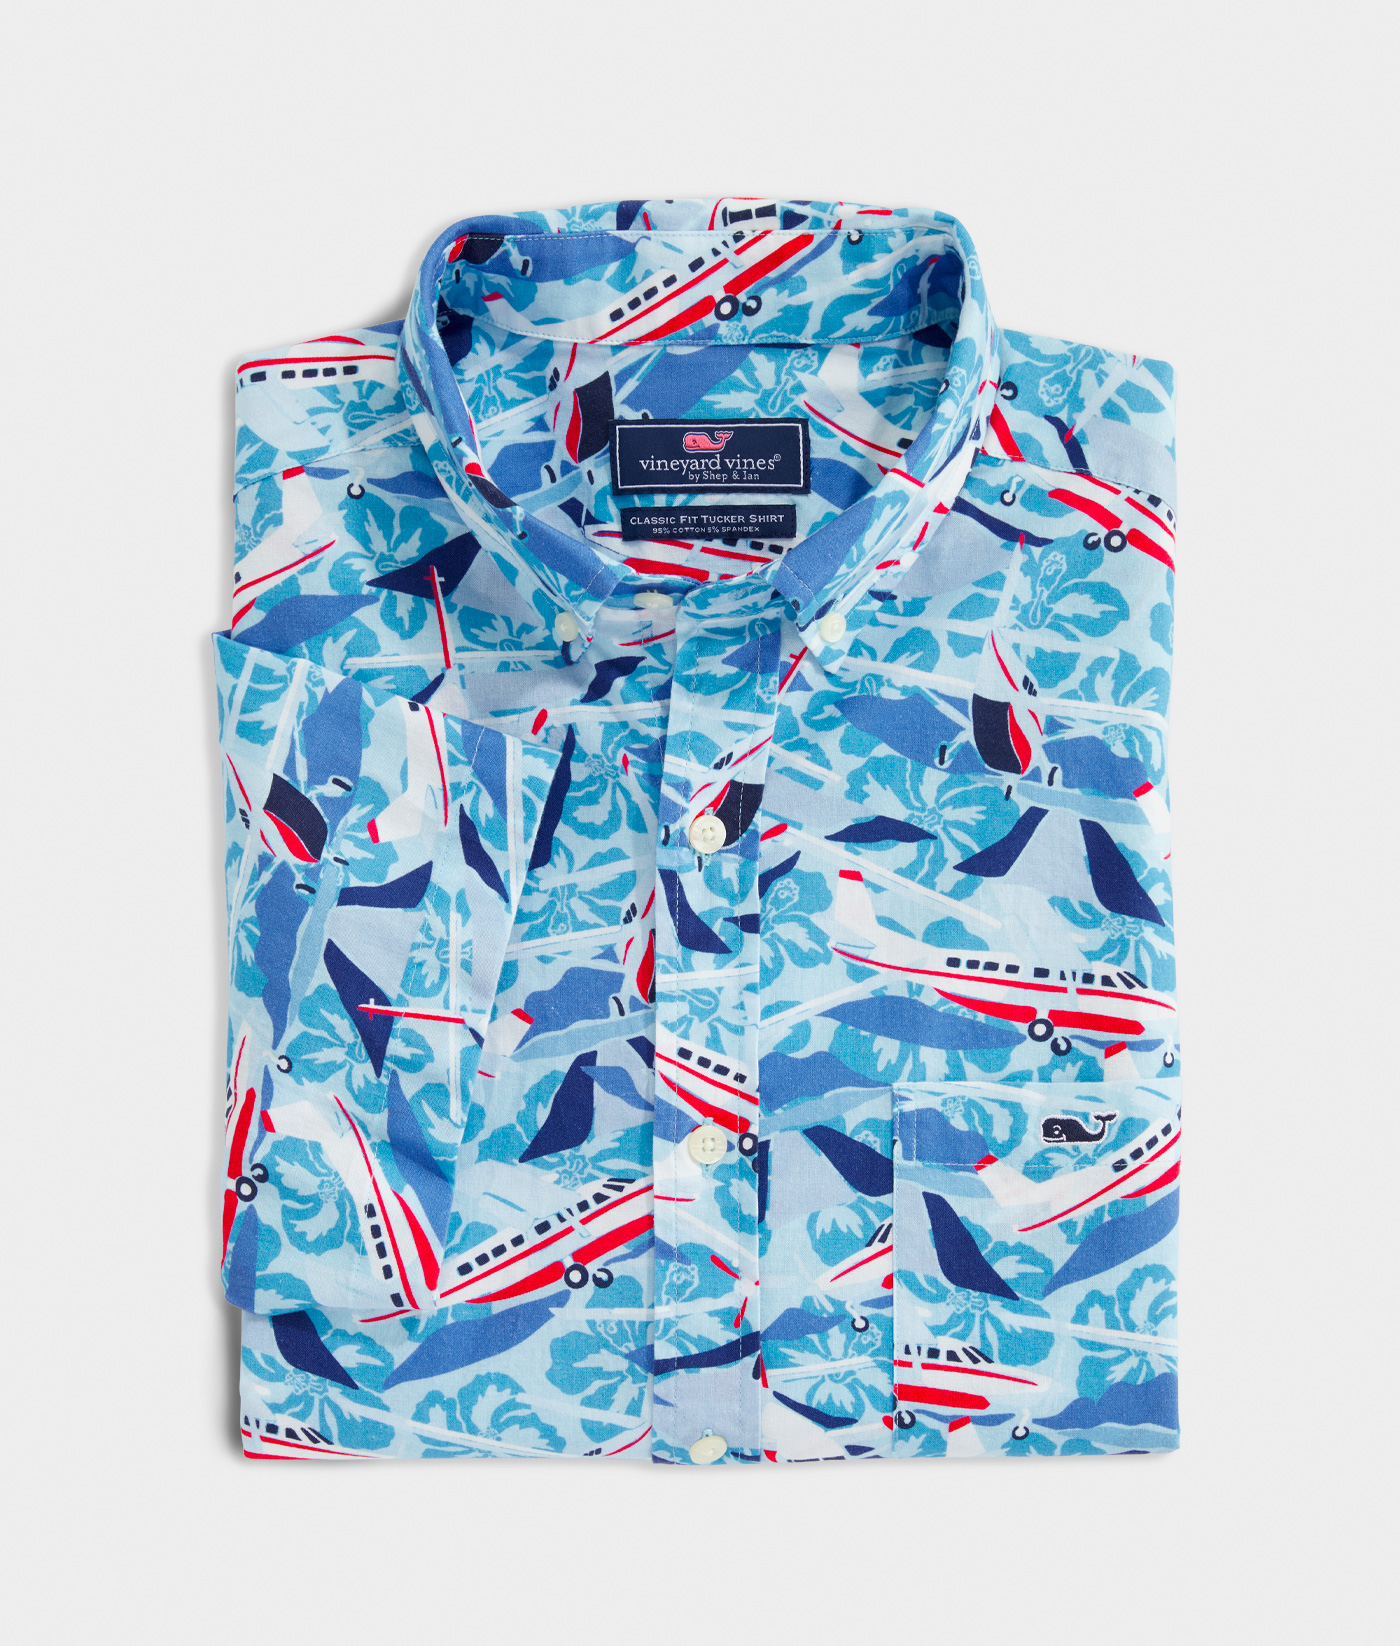 Shop Classic Fit Jet Set Print Short-Sleeve Shirt in Stretch Cotton at ...